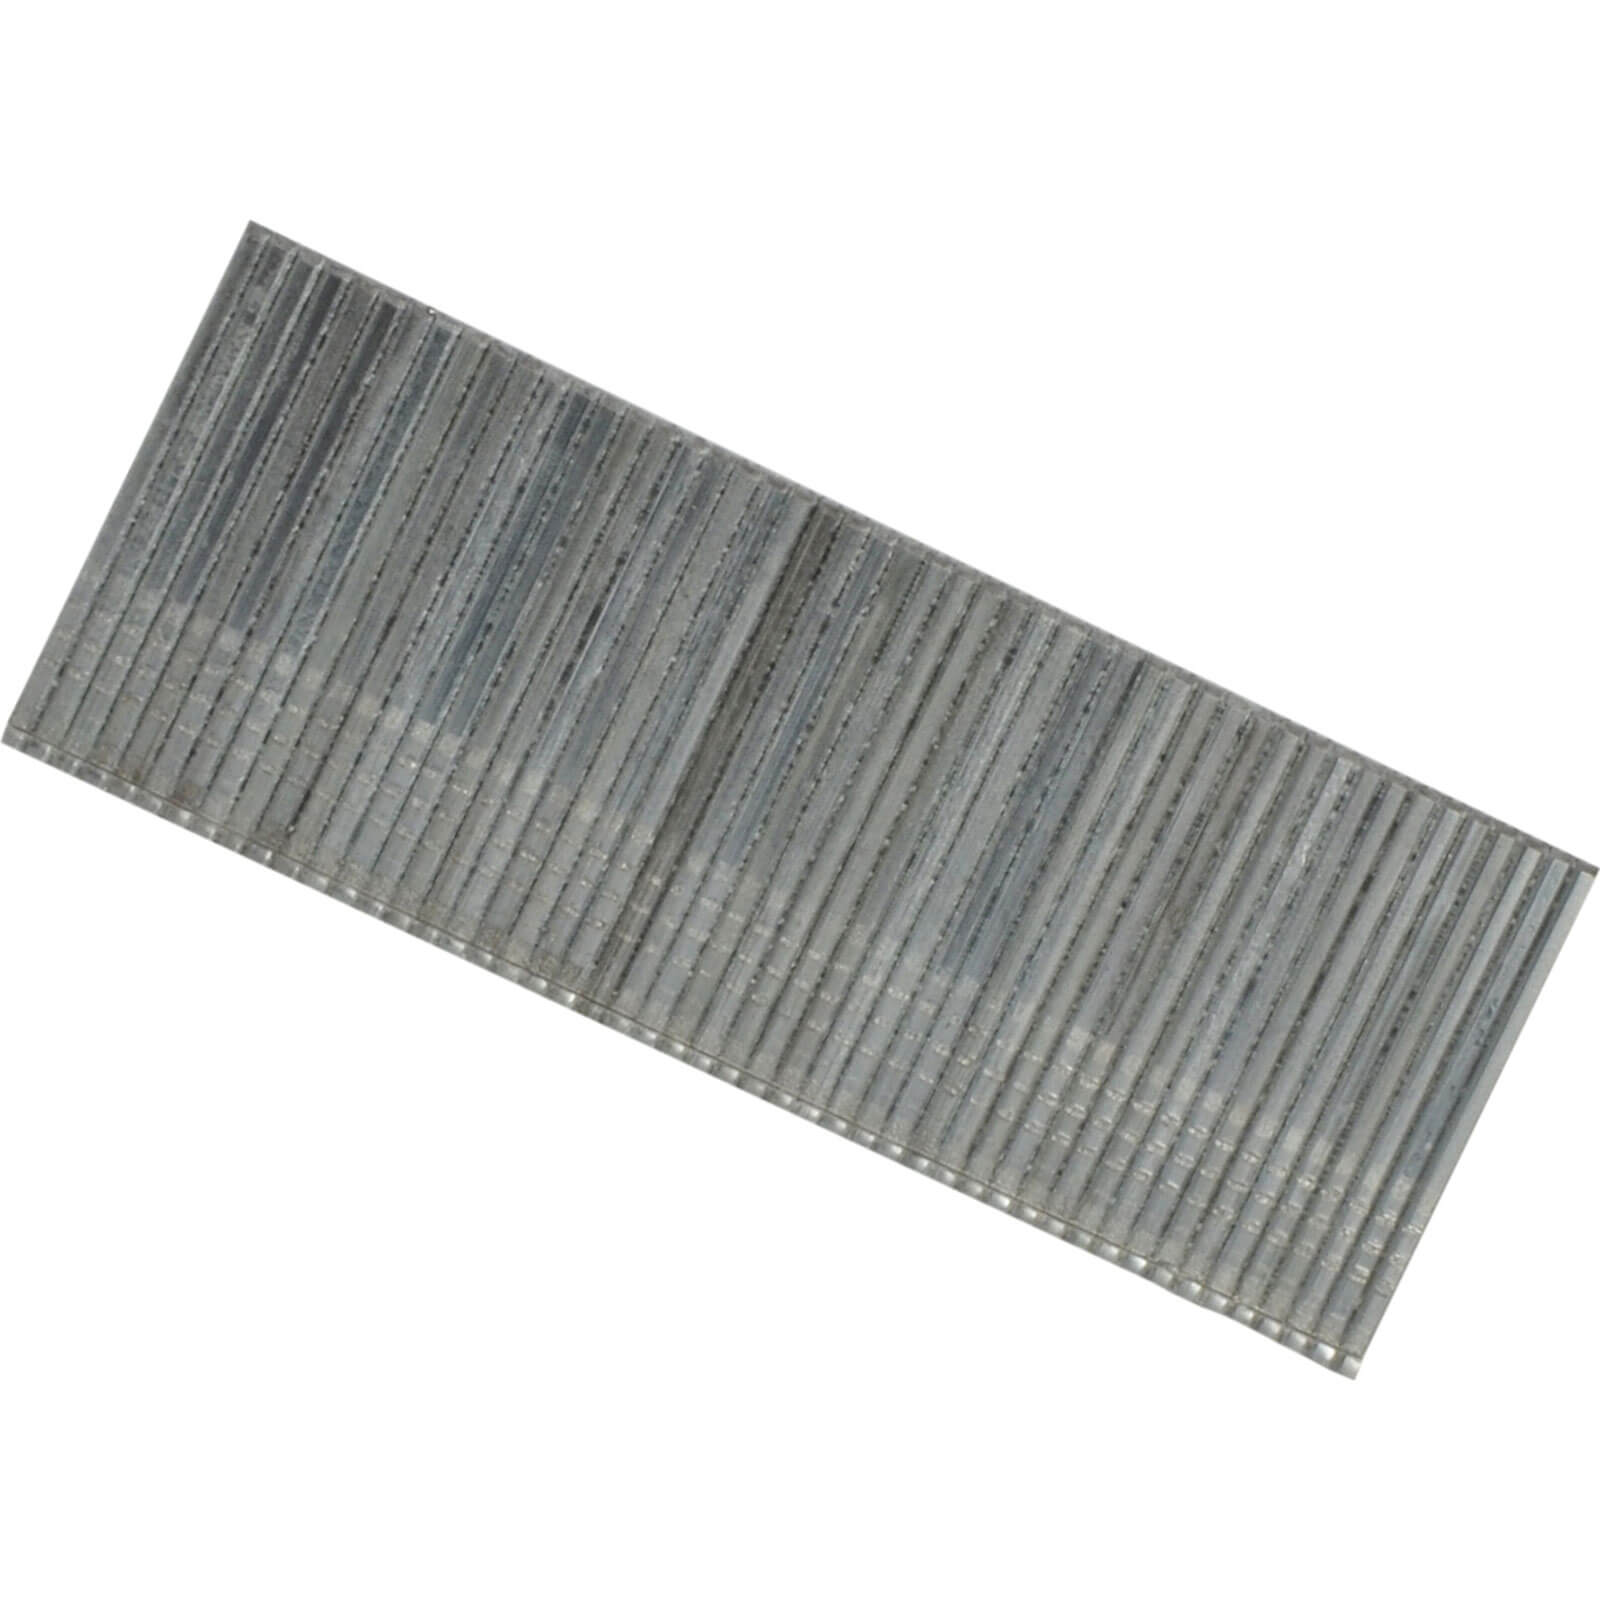 Photo of Bostitch 16 Gauge Straight Finish Nails 50mm Pack Of 2500